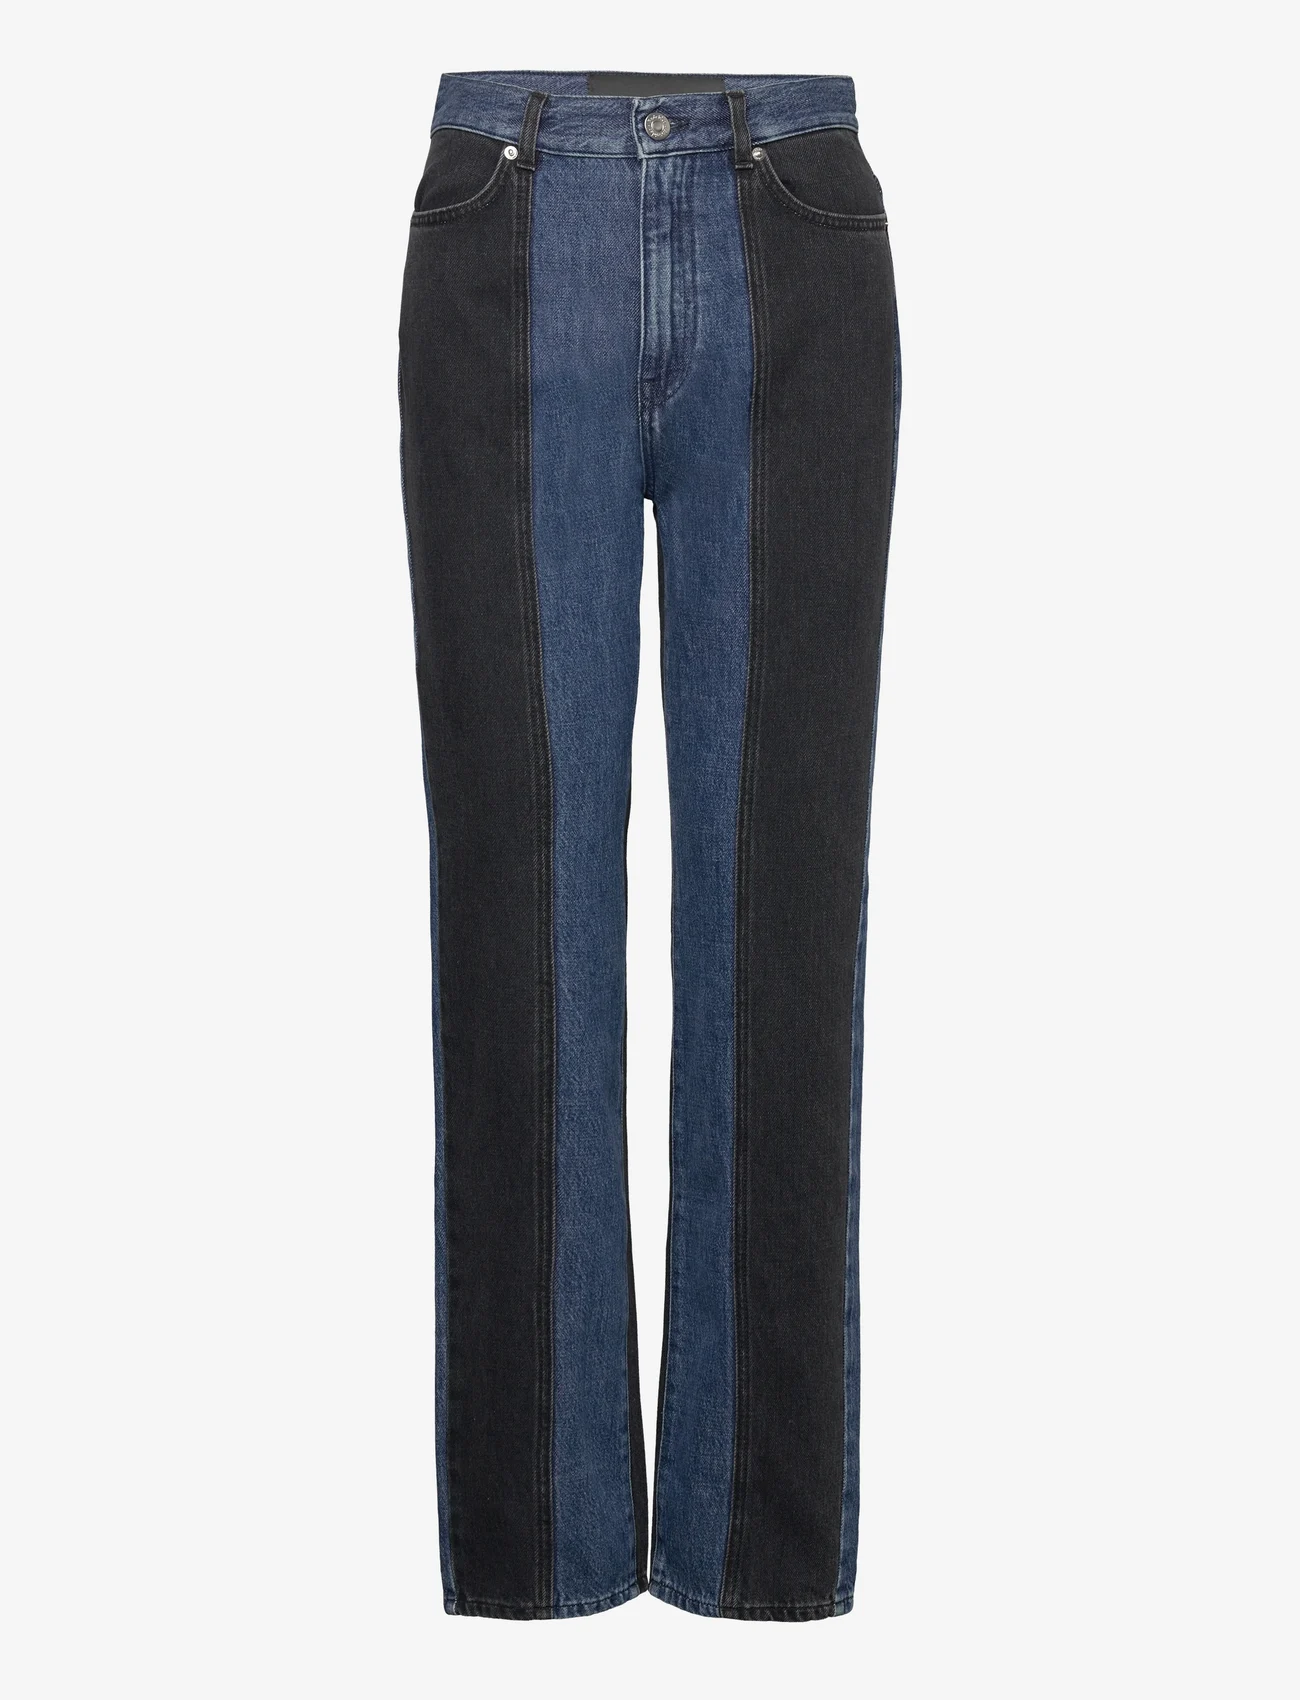 RODEBJER - Rodebjer Patchwork Straight - straight jeans - indigo/black - 0